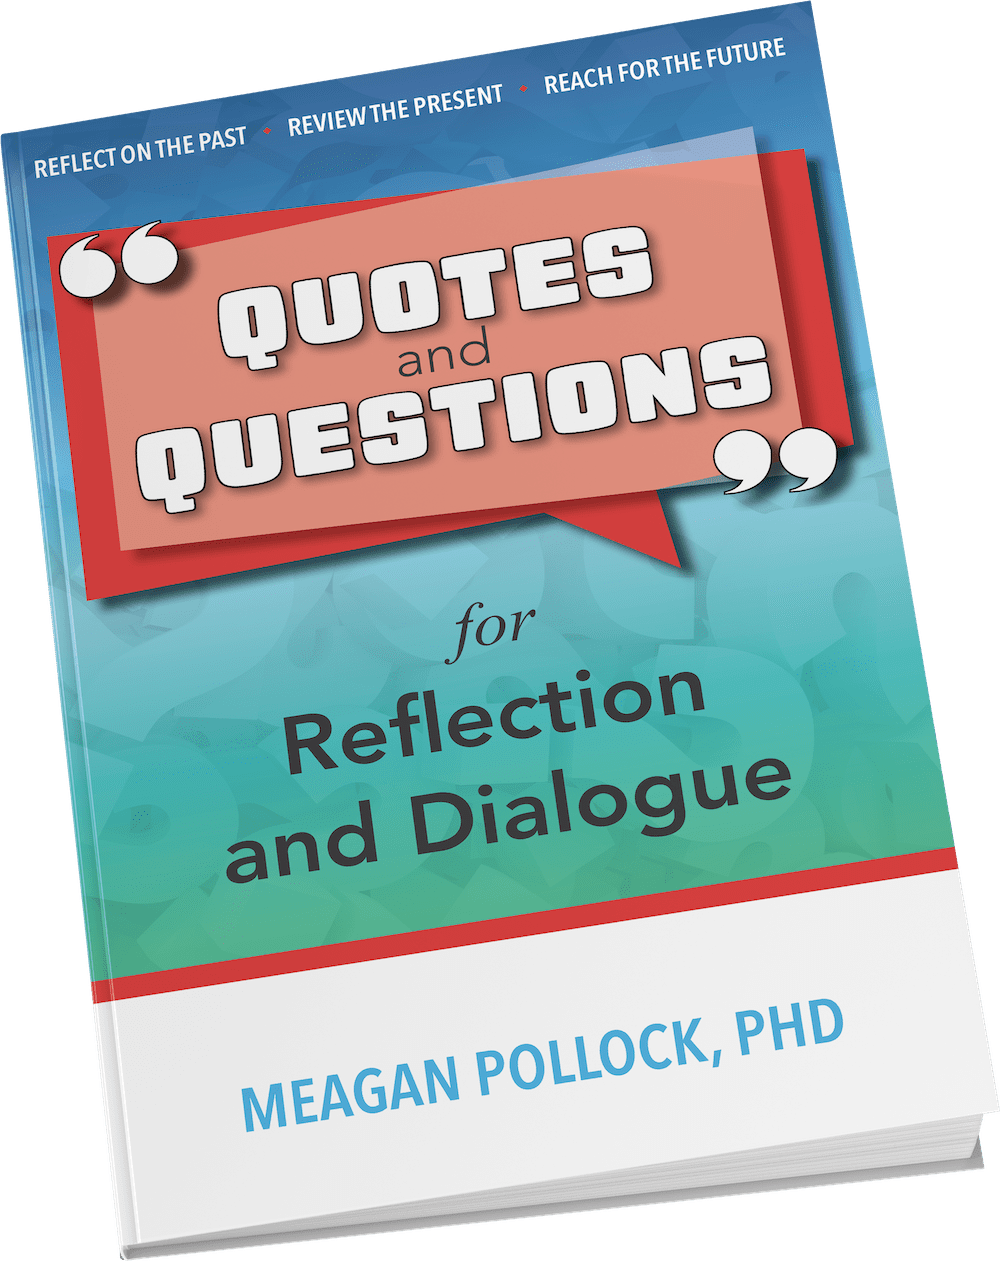 Quotes and Questions for Reflection and Dialogue by Dr. Meagan Pollock